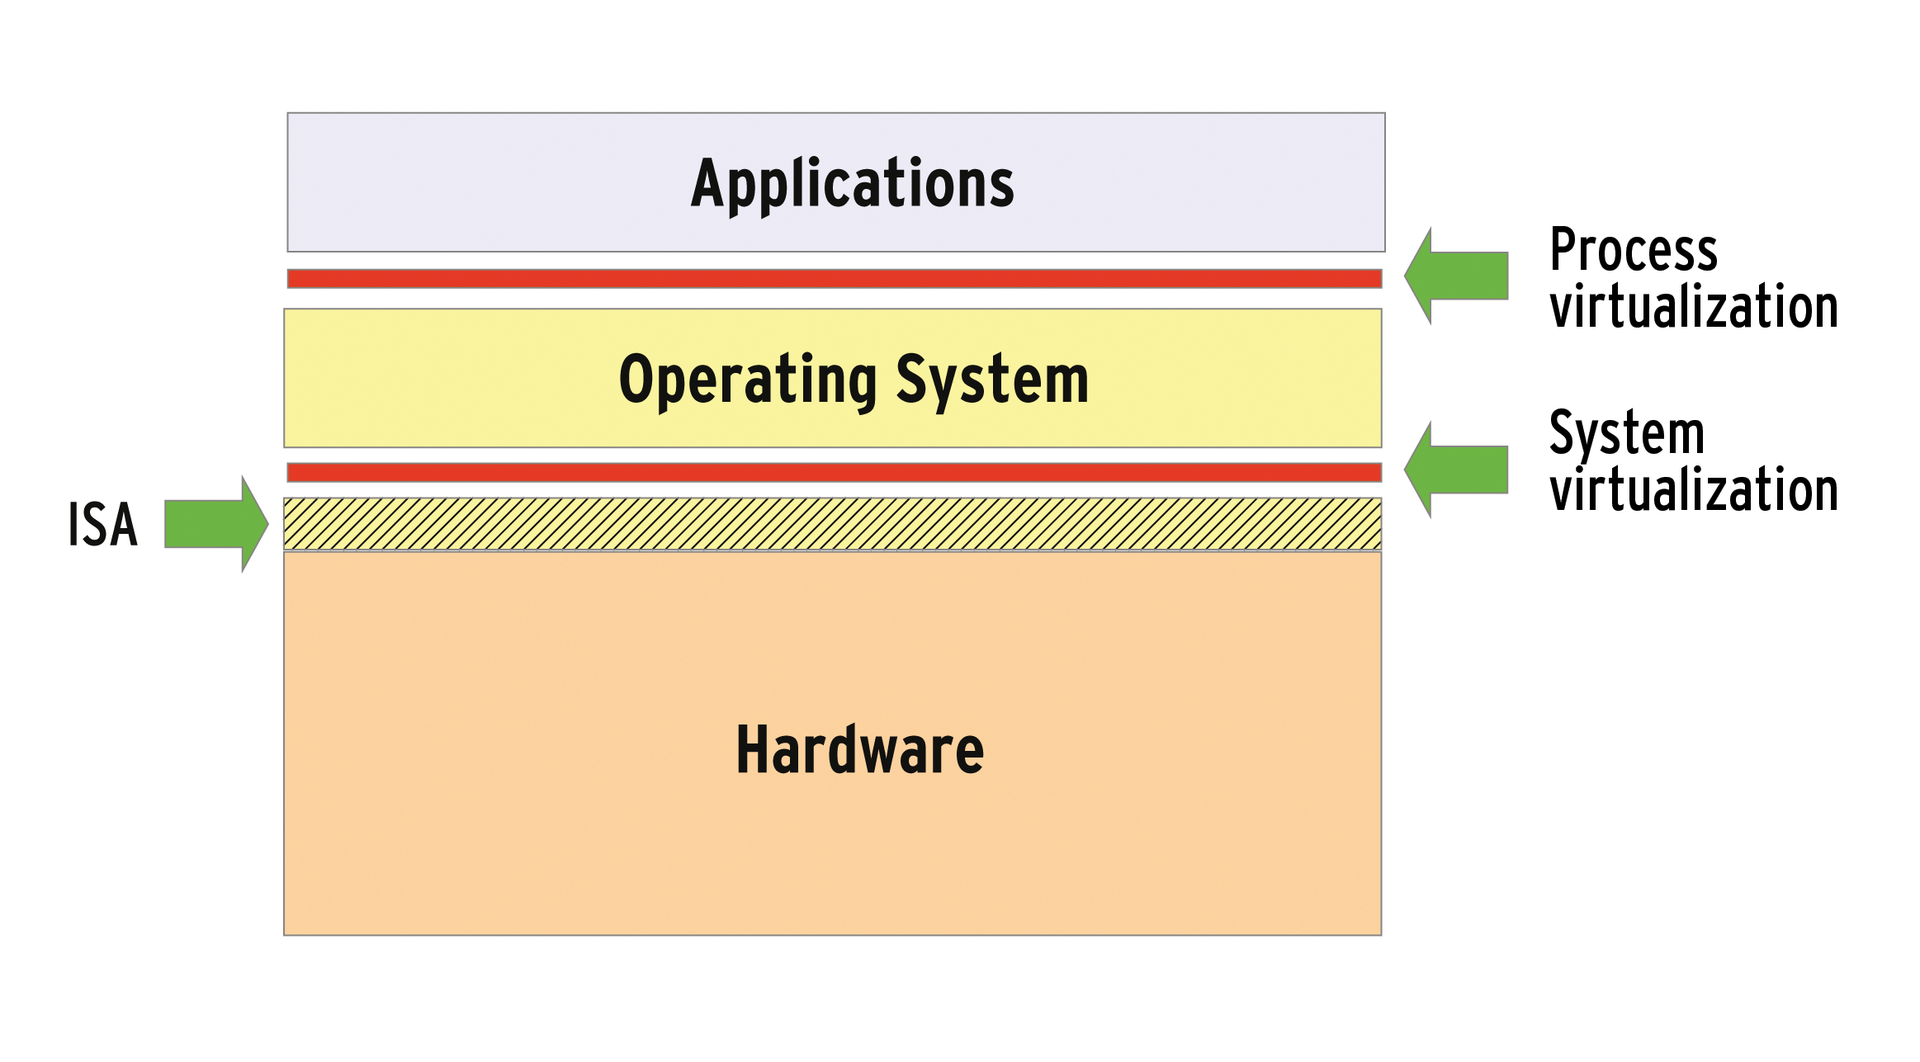 An abstraction layer always exists in virtualization; the question is where. 